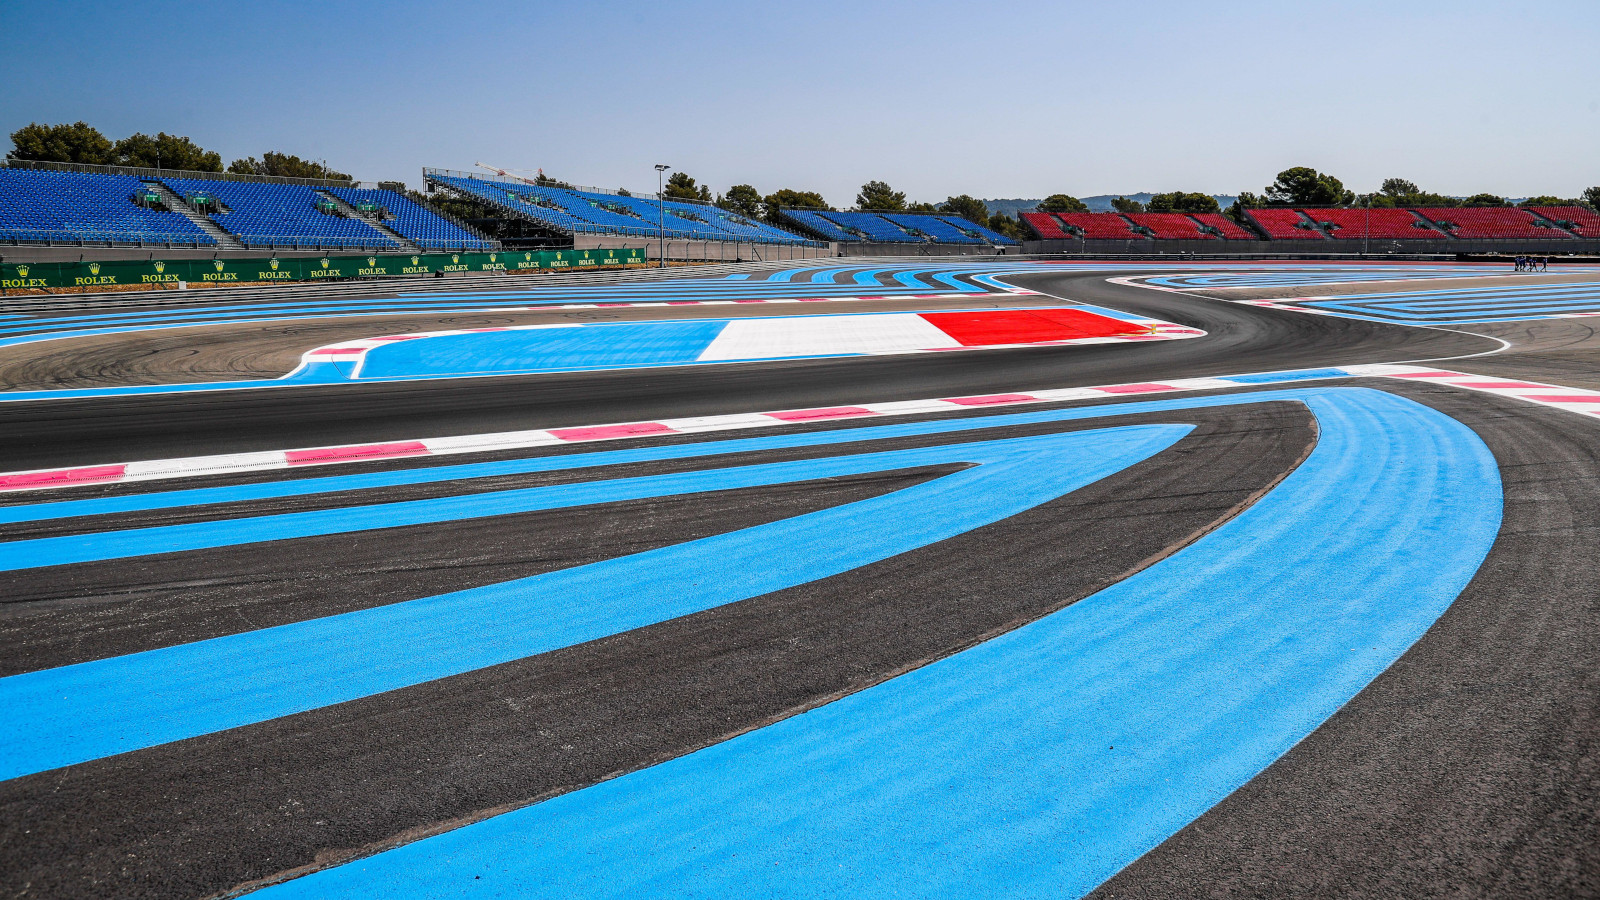 French Grand Prix organisers respond after being axed from F1 2023 calendar PlanetF1